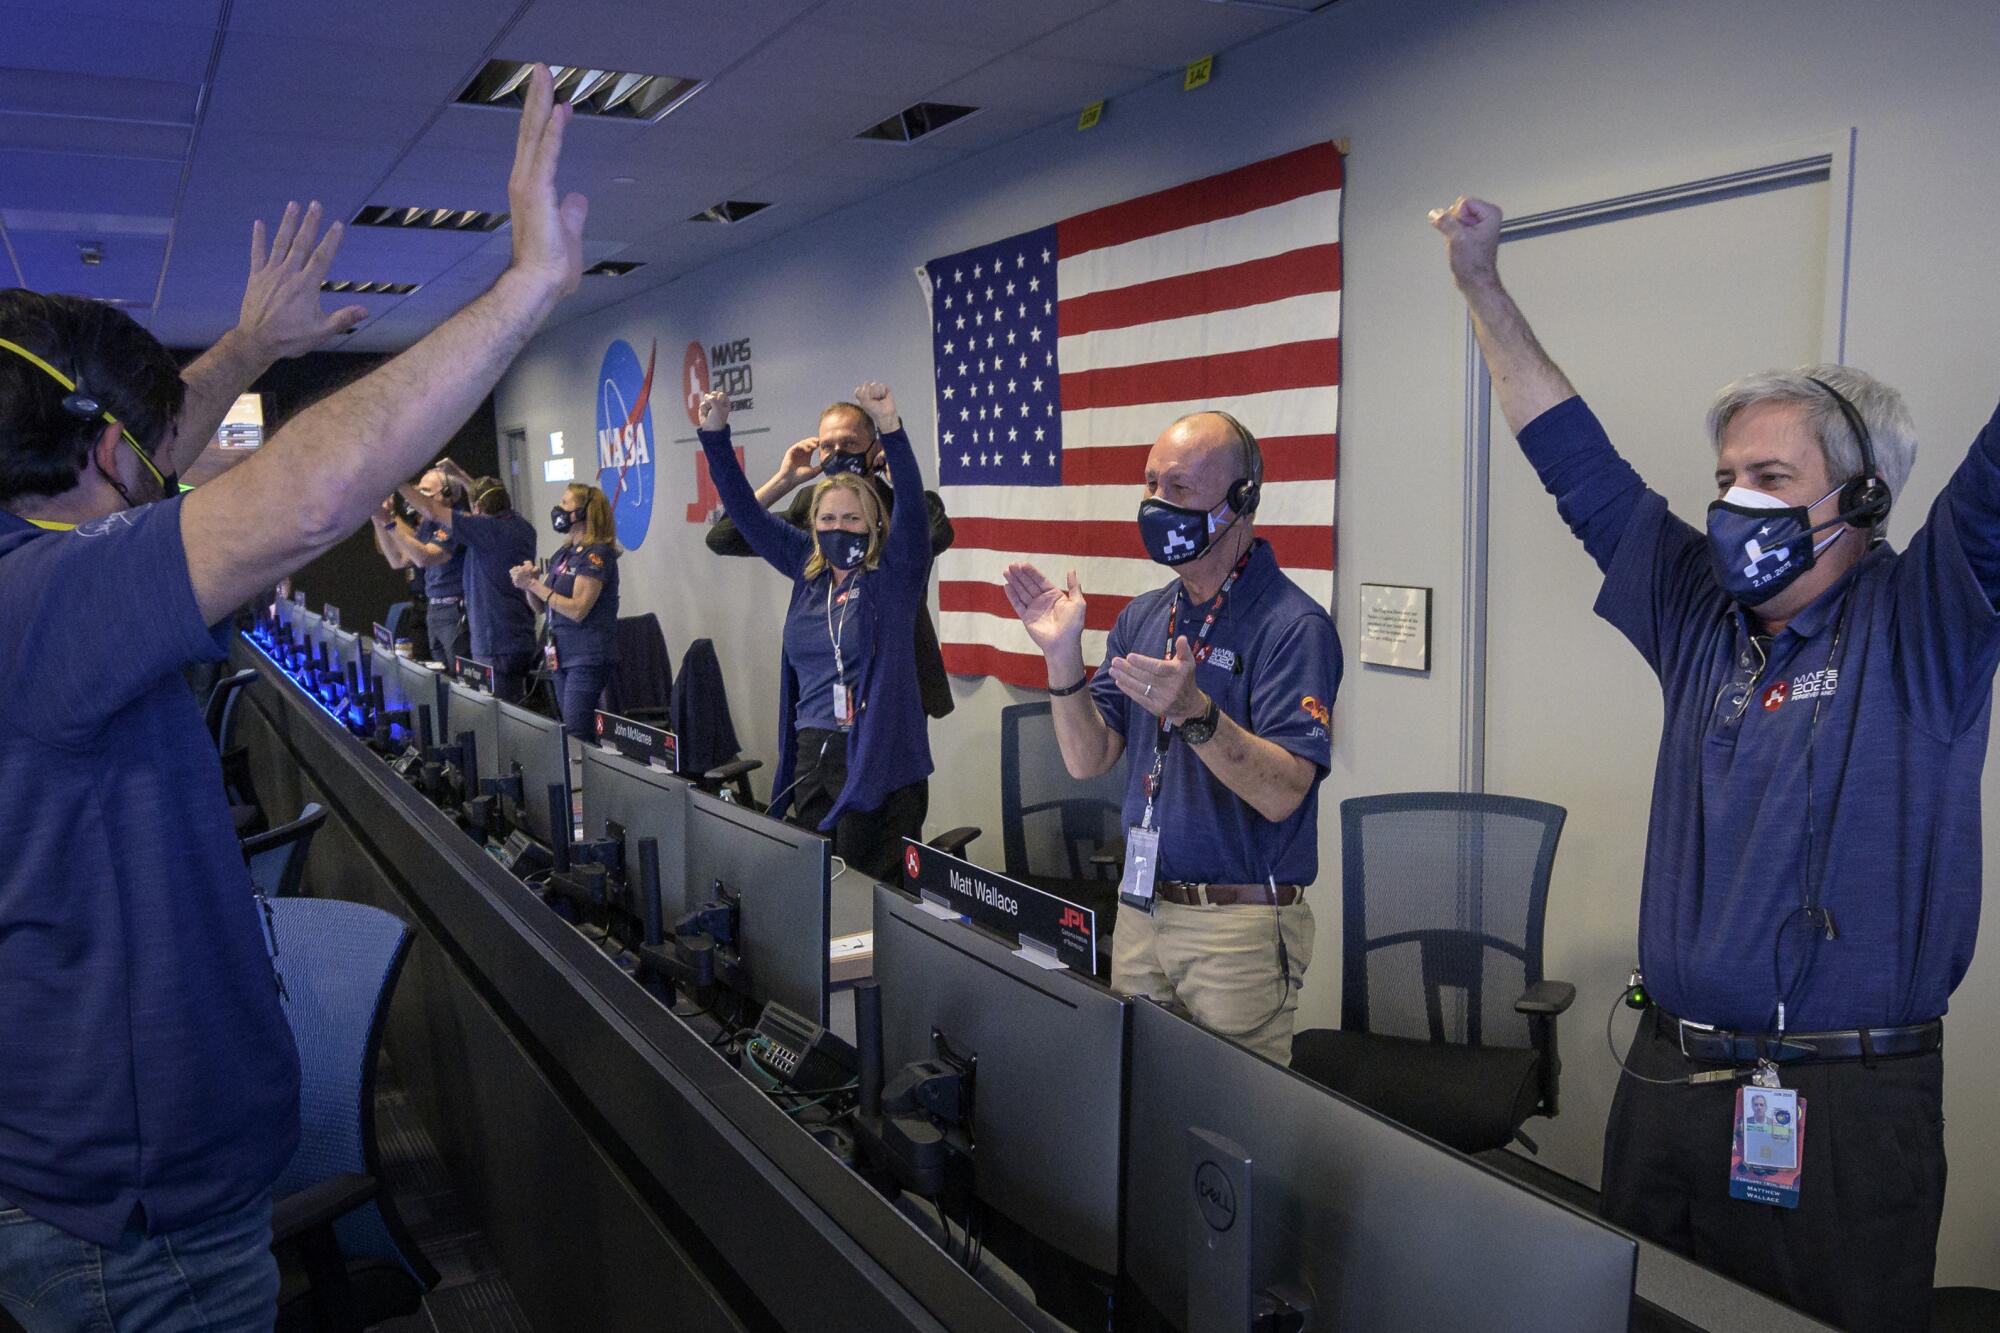 NASA workers raise arms and clap in celebration in mission control